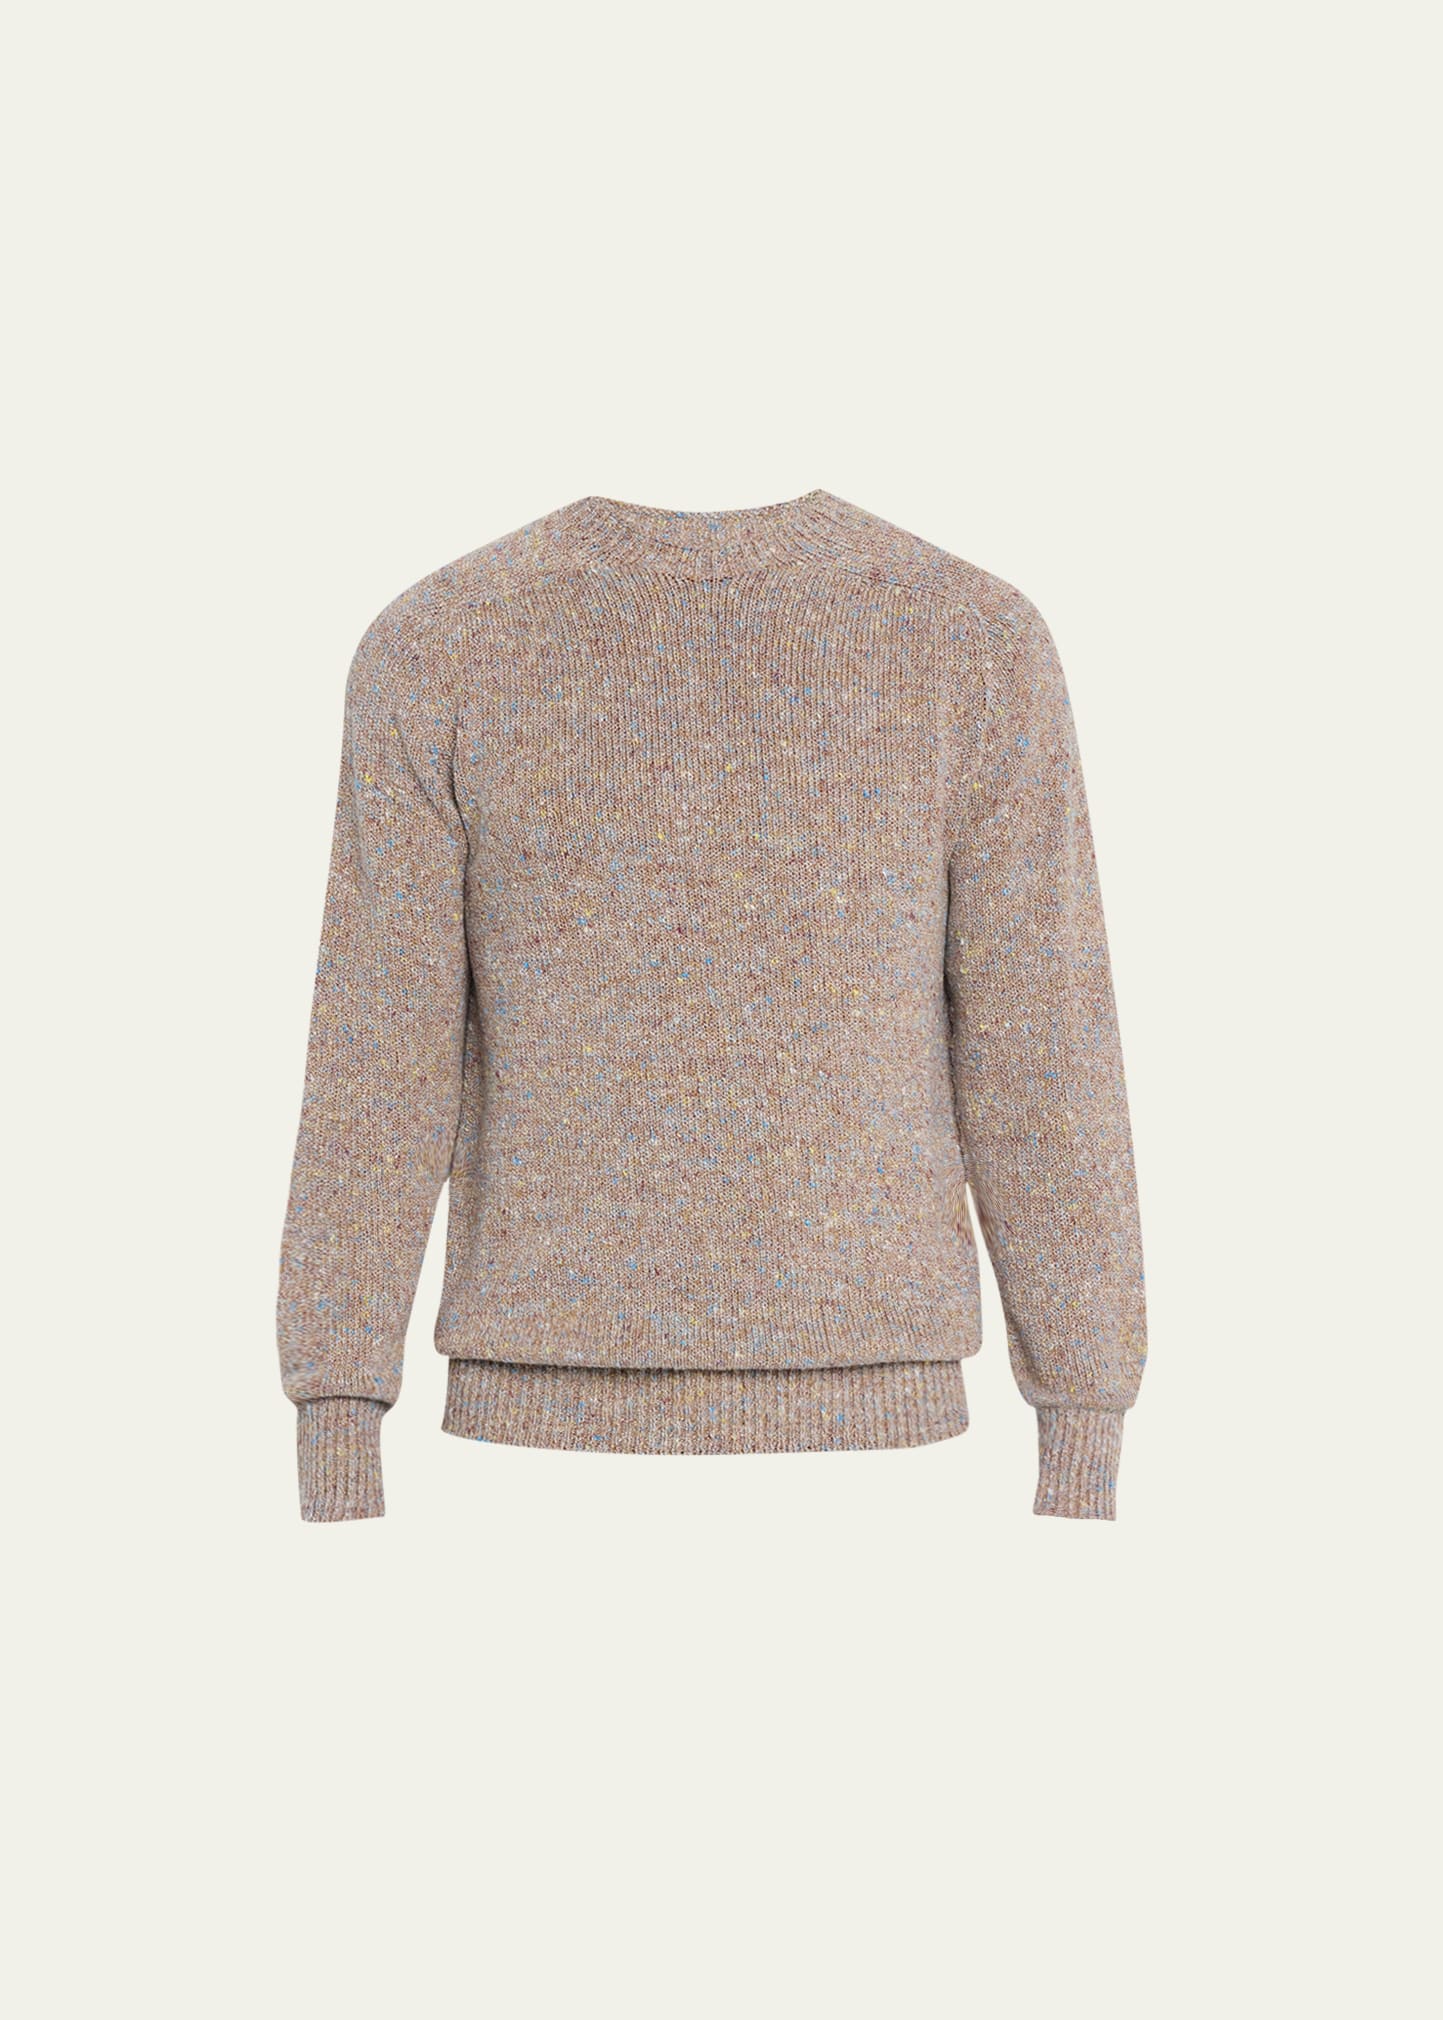 Howlin' Men's Marled Crew Sweater In Camel Mix